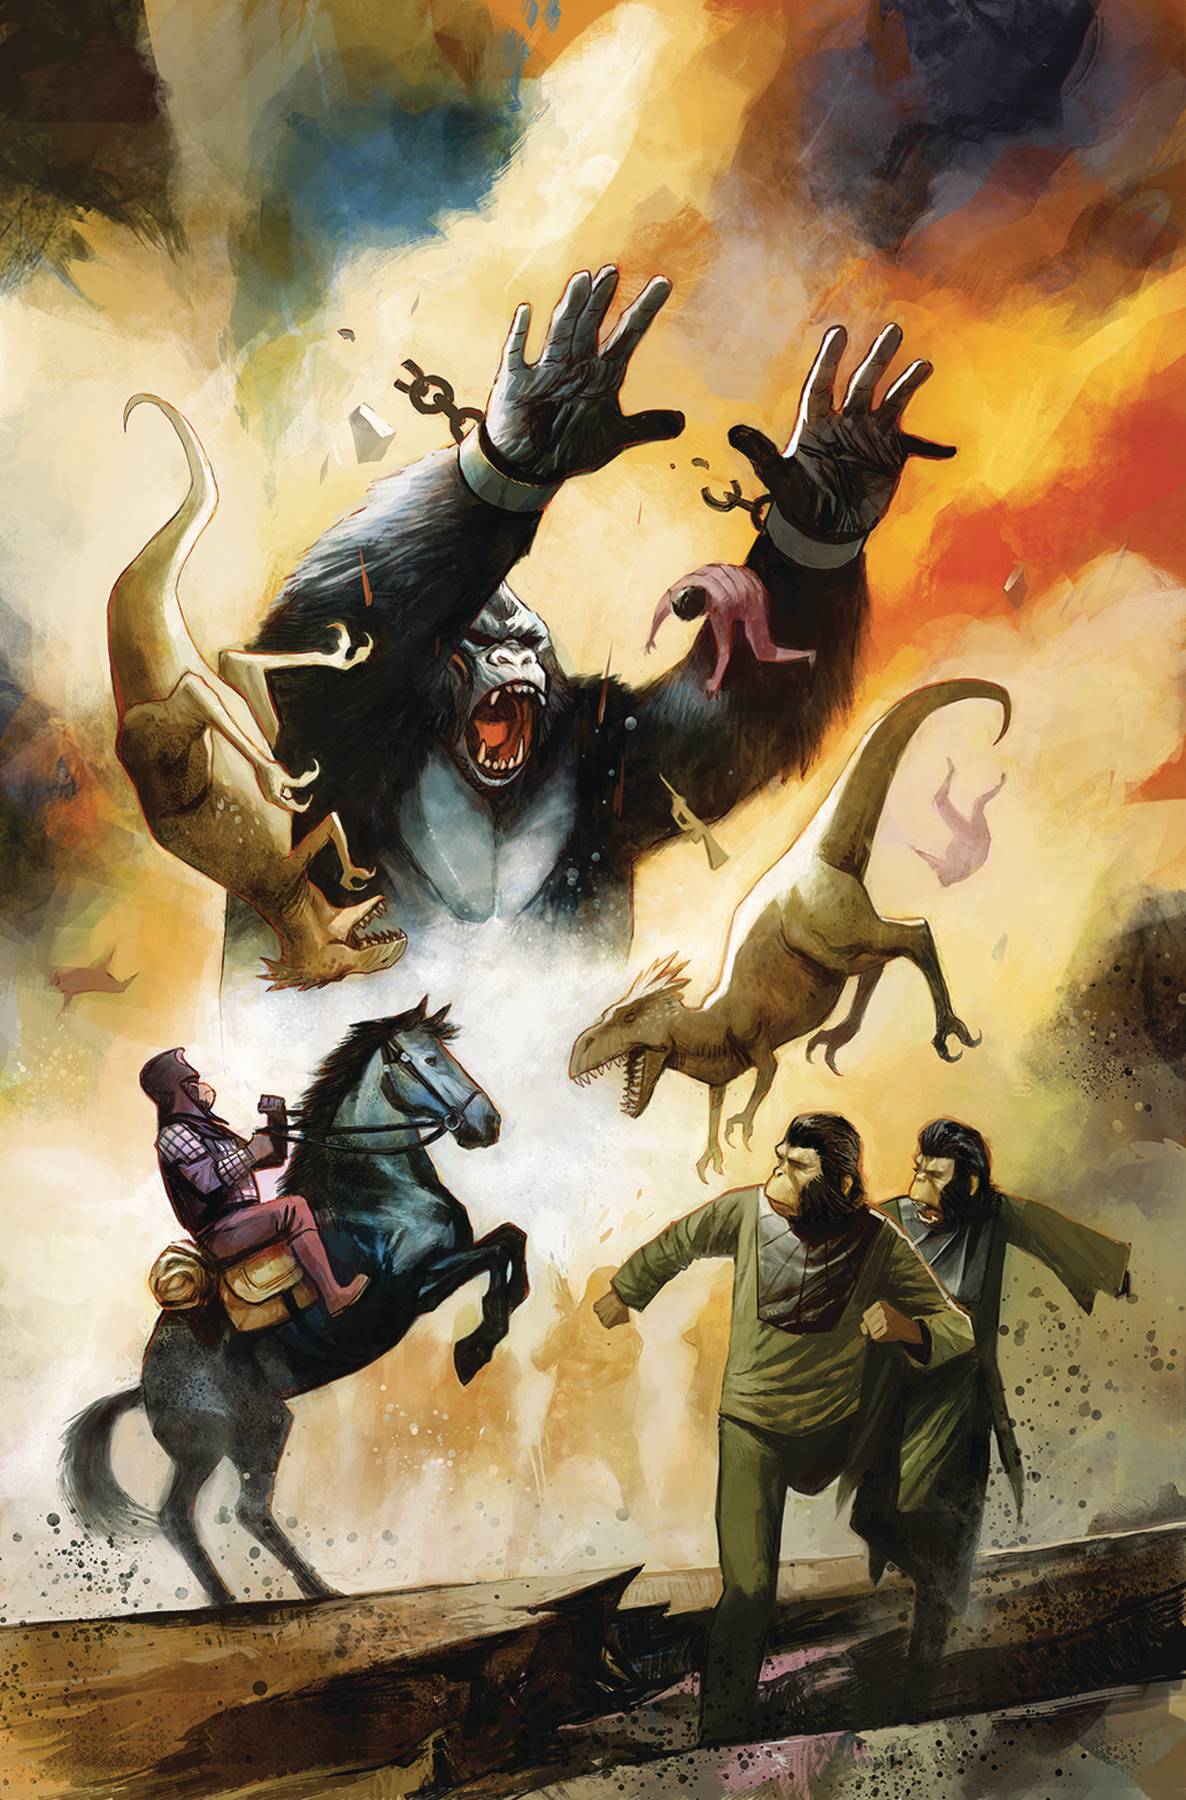 Kong On Planet of Apes #5